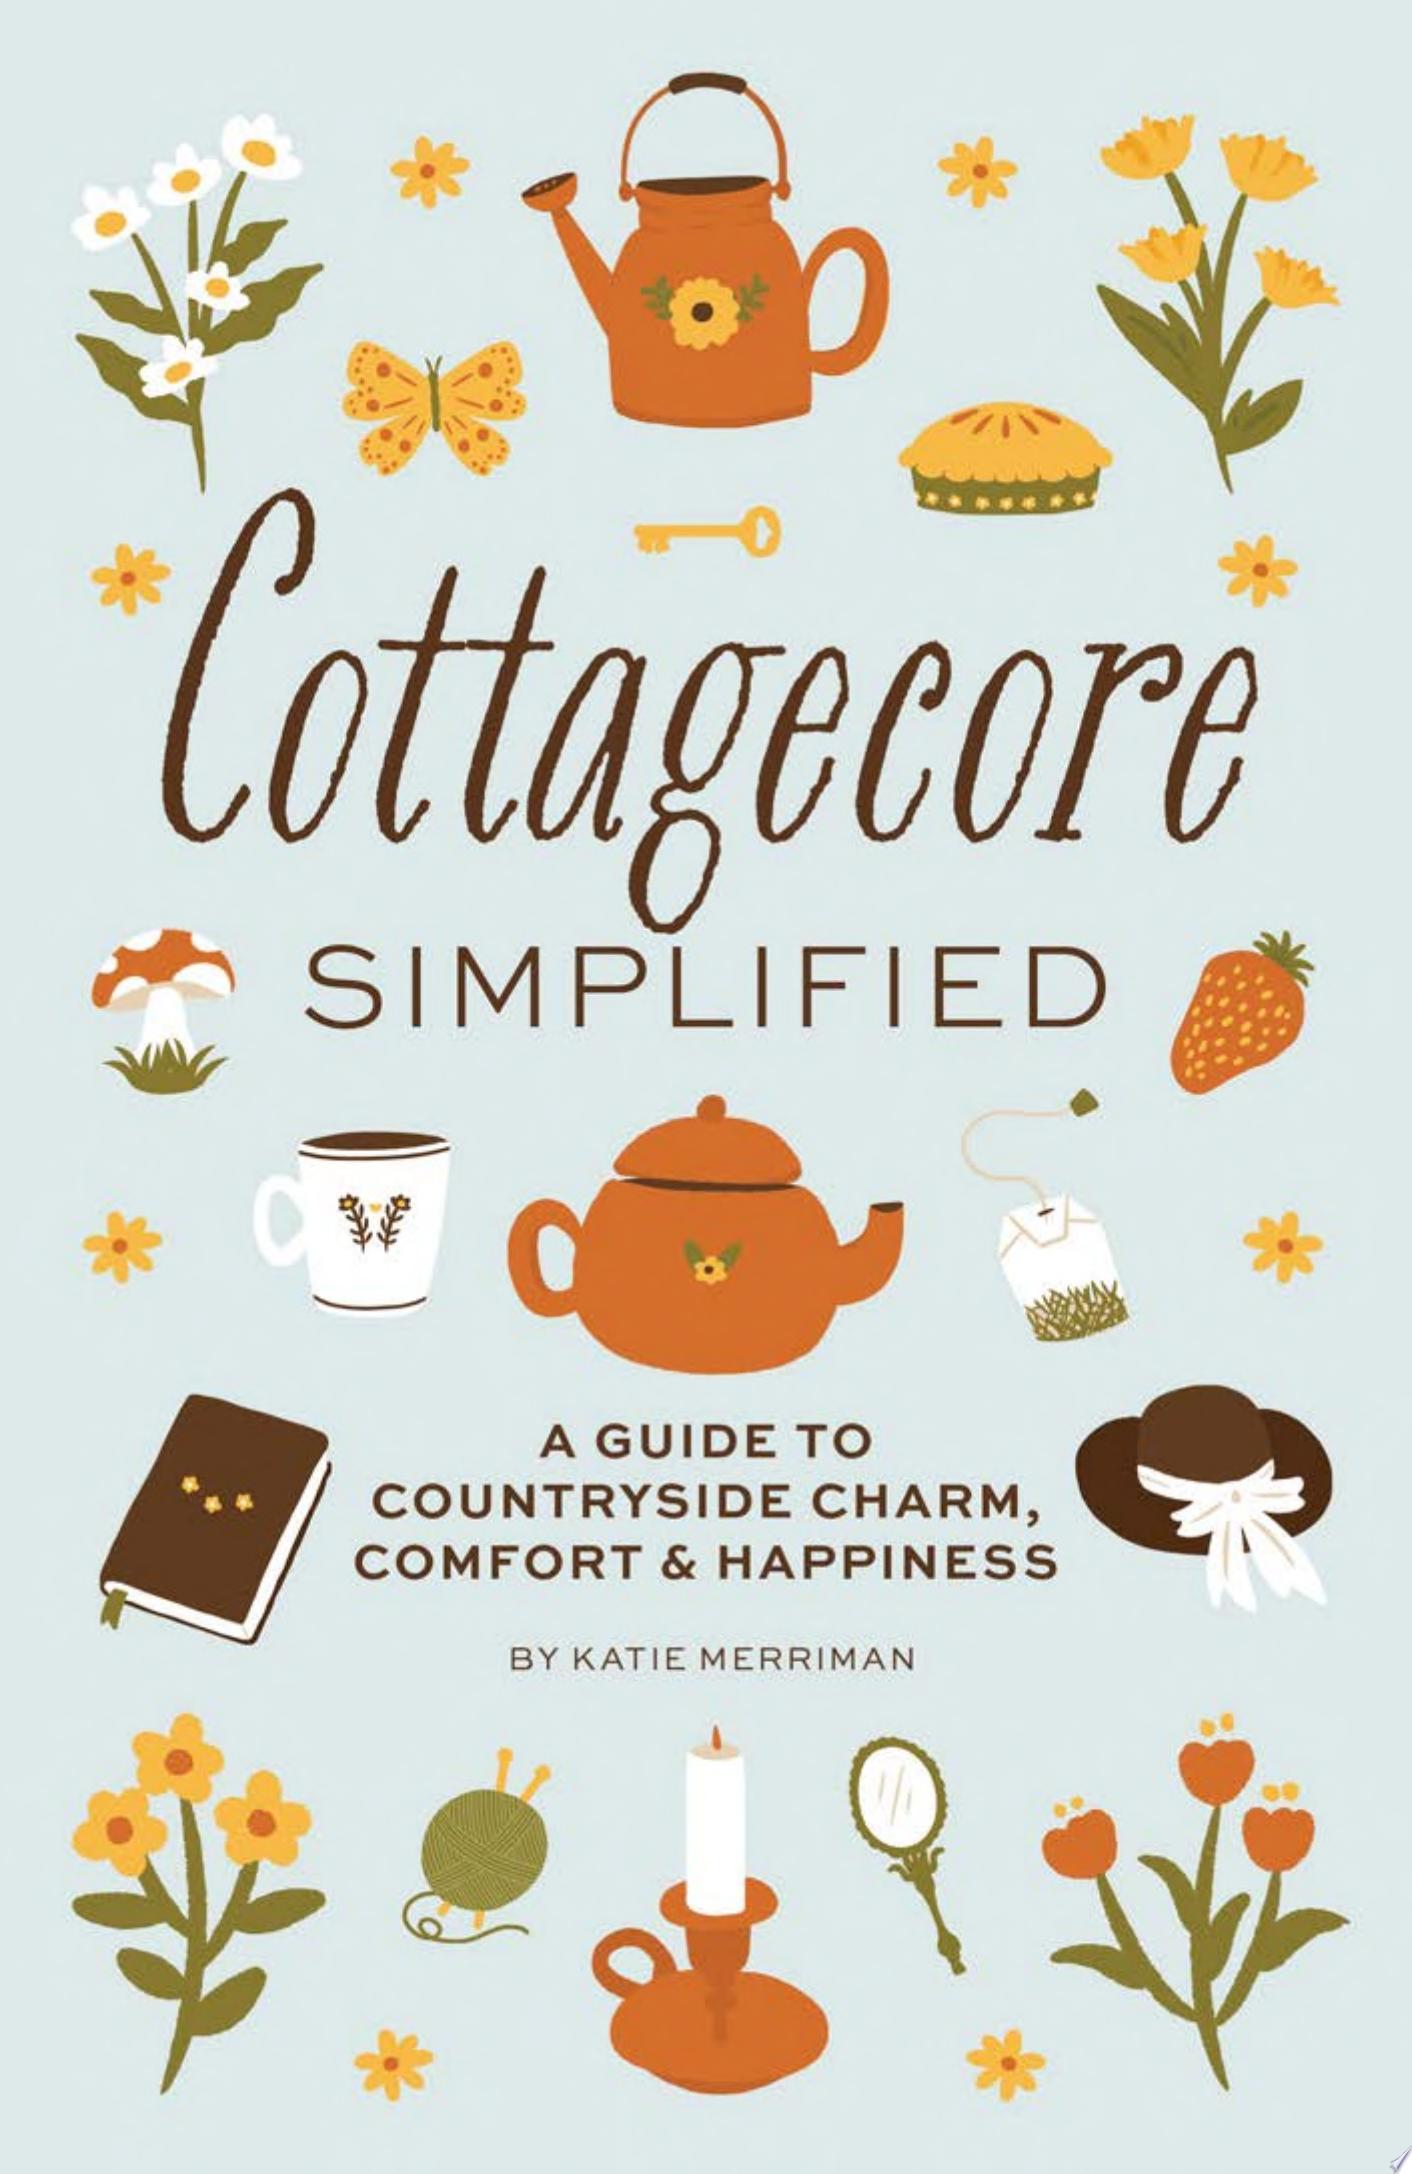 Image for "Cottagecore Simplified"